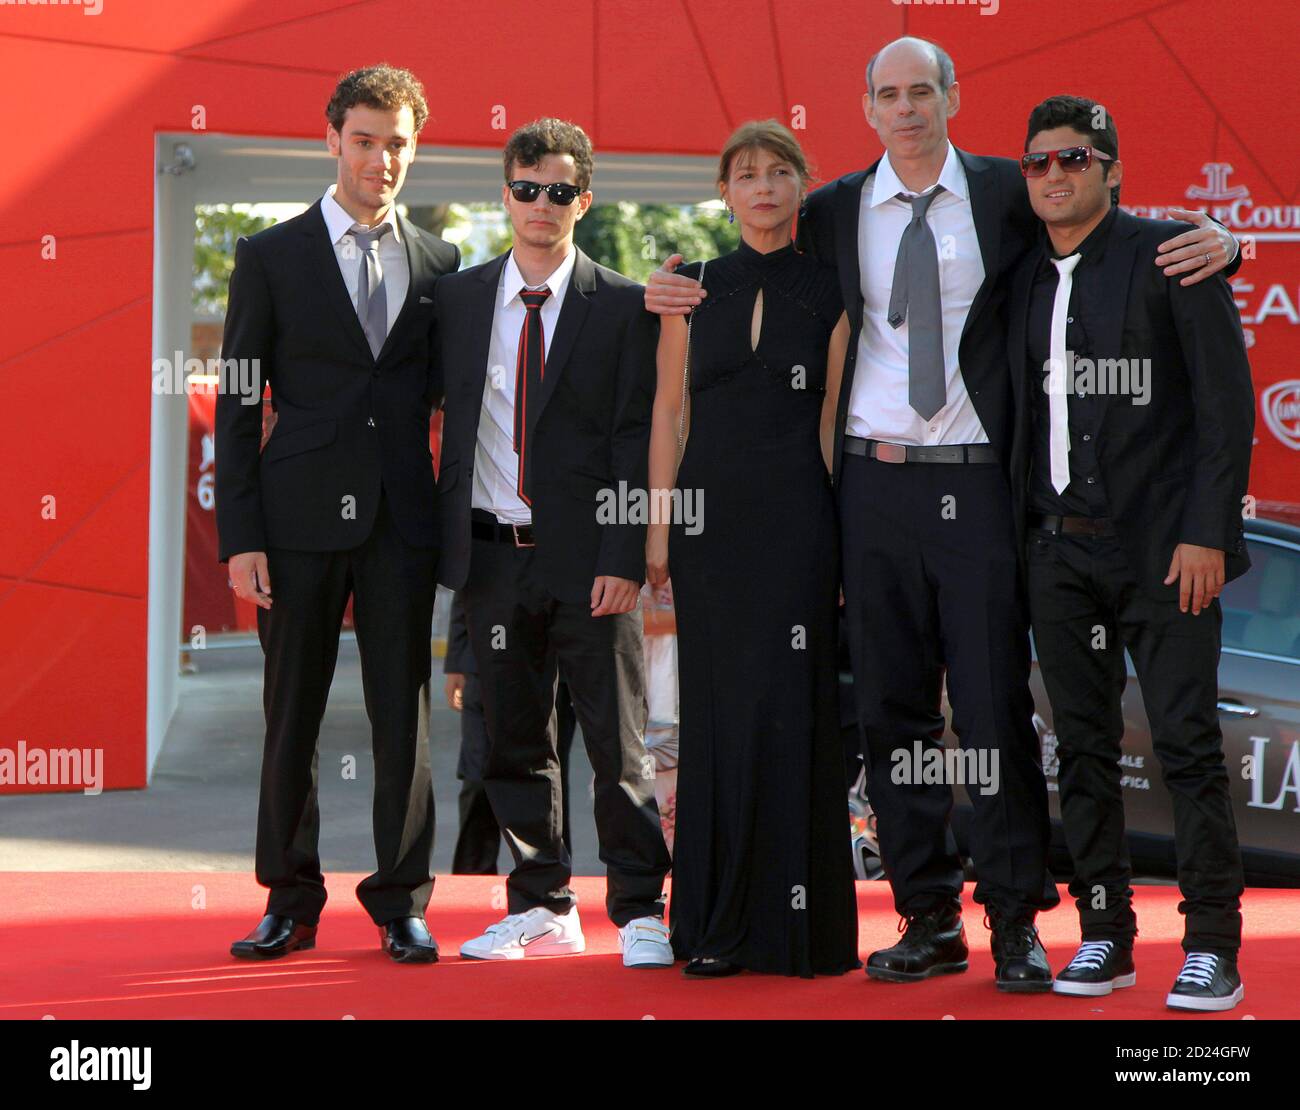 Actors Yoav Donat (L), Michael Moshonov (2nd L), director Samuel Maoz (2nd R) and his wife as well as actor Oshri Cohen (R) pose during the premiere of 'Lebanon' at the 66th Venice Film Festival September 8, 2009.  REUTERS/Alessandro Bianchi   (ITALY ENTERTAINMENT) Stock Photo